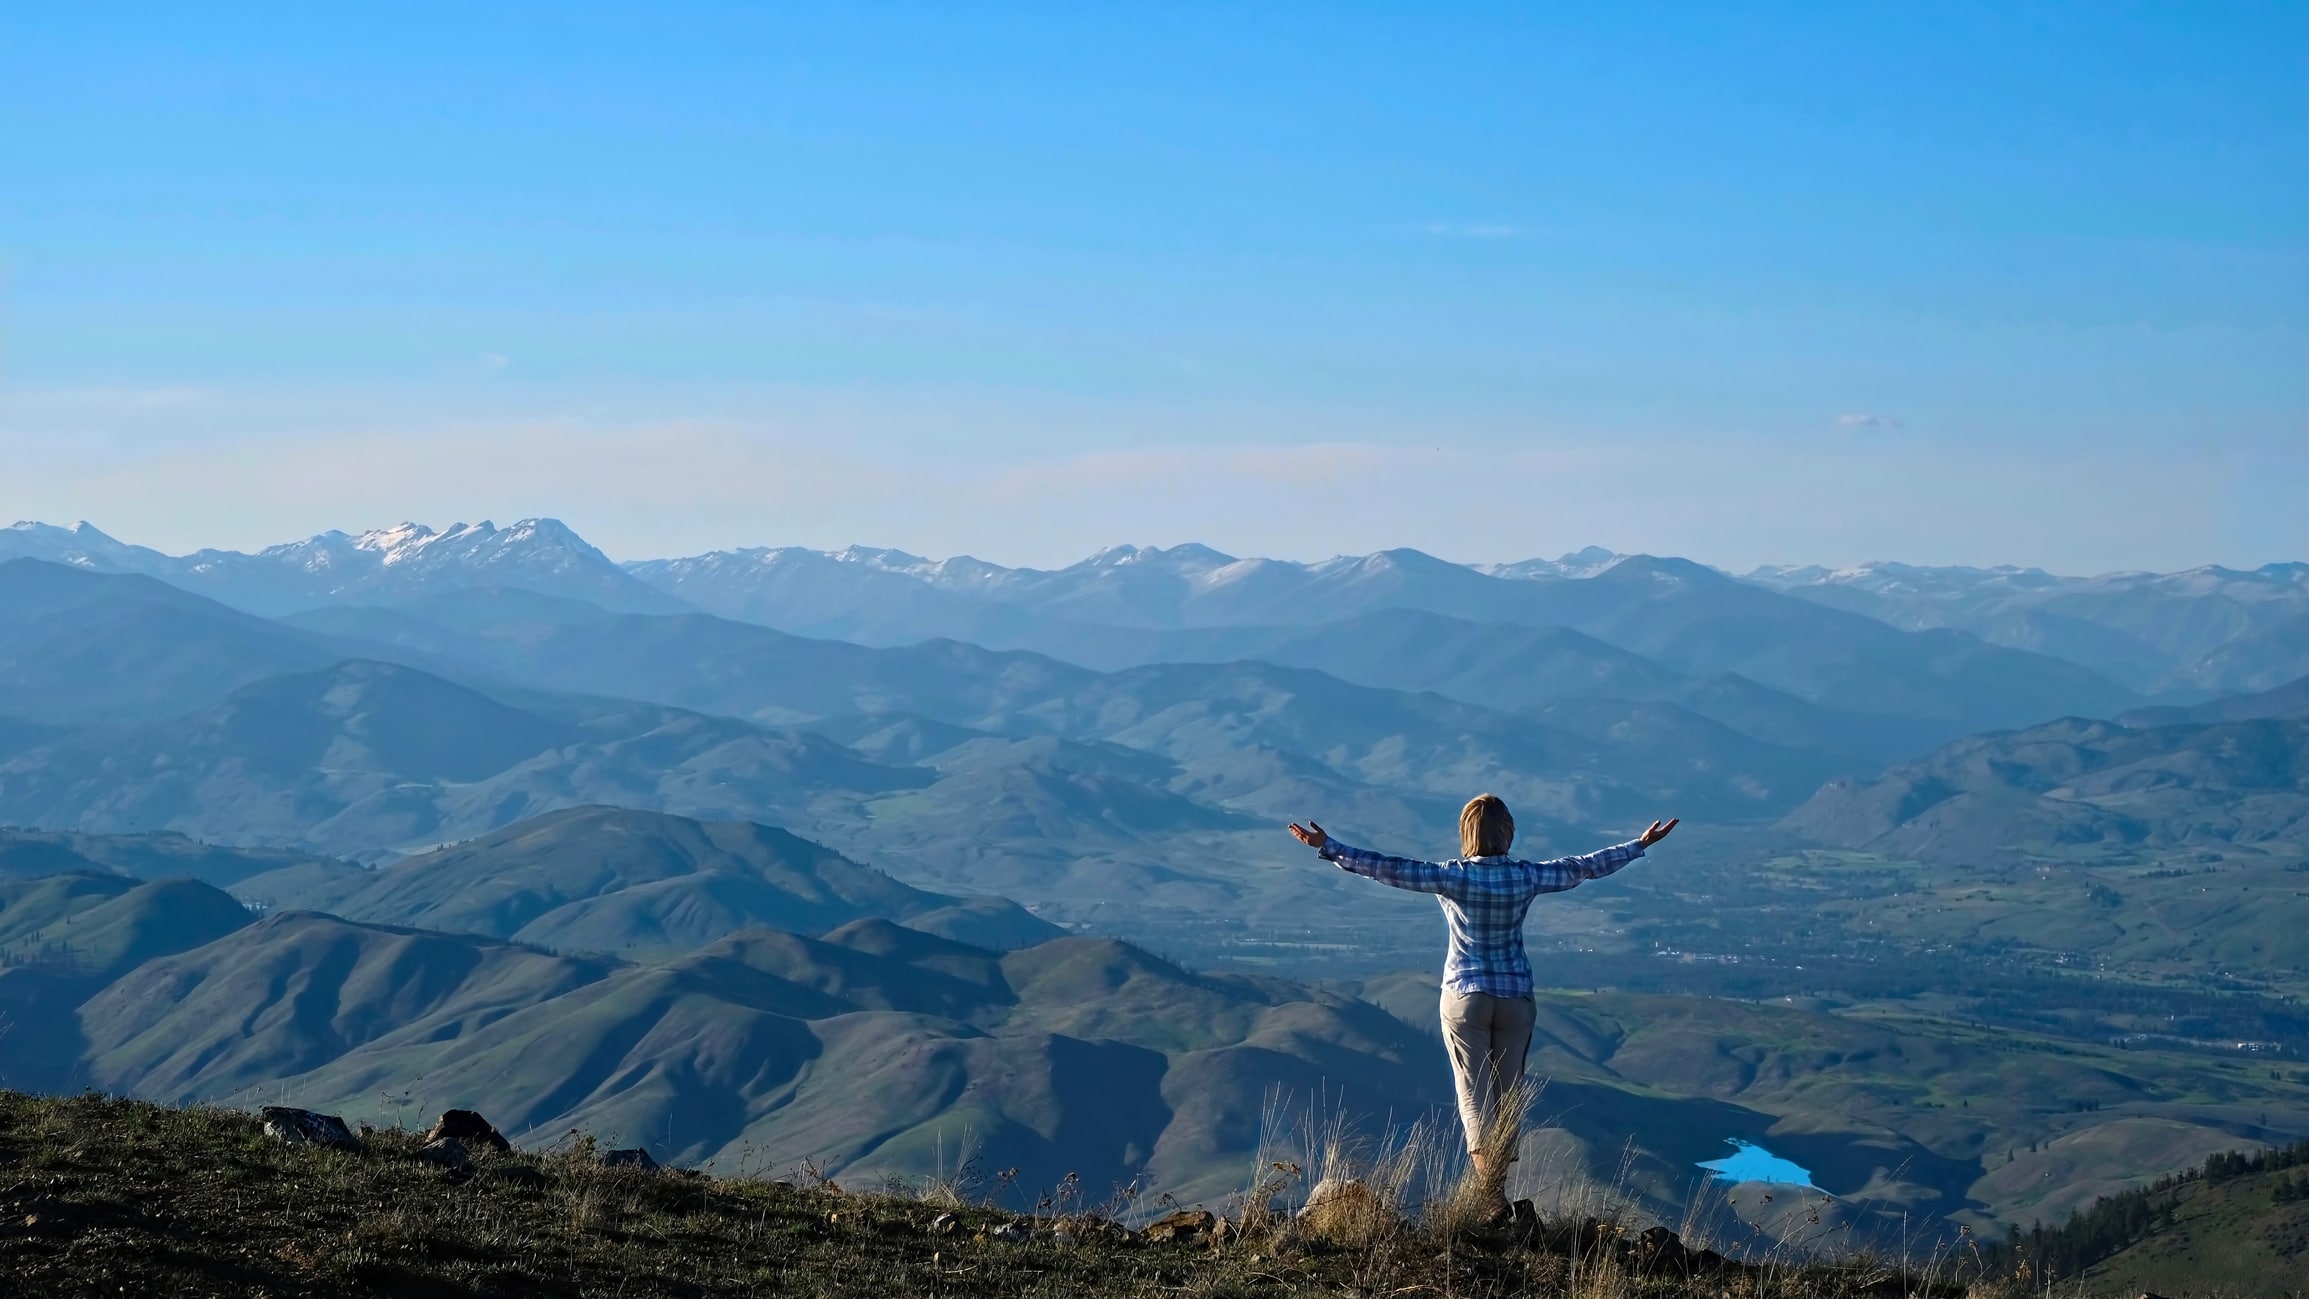 A woman spreads her arms as she gazes out over a vast mountain view.